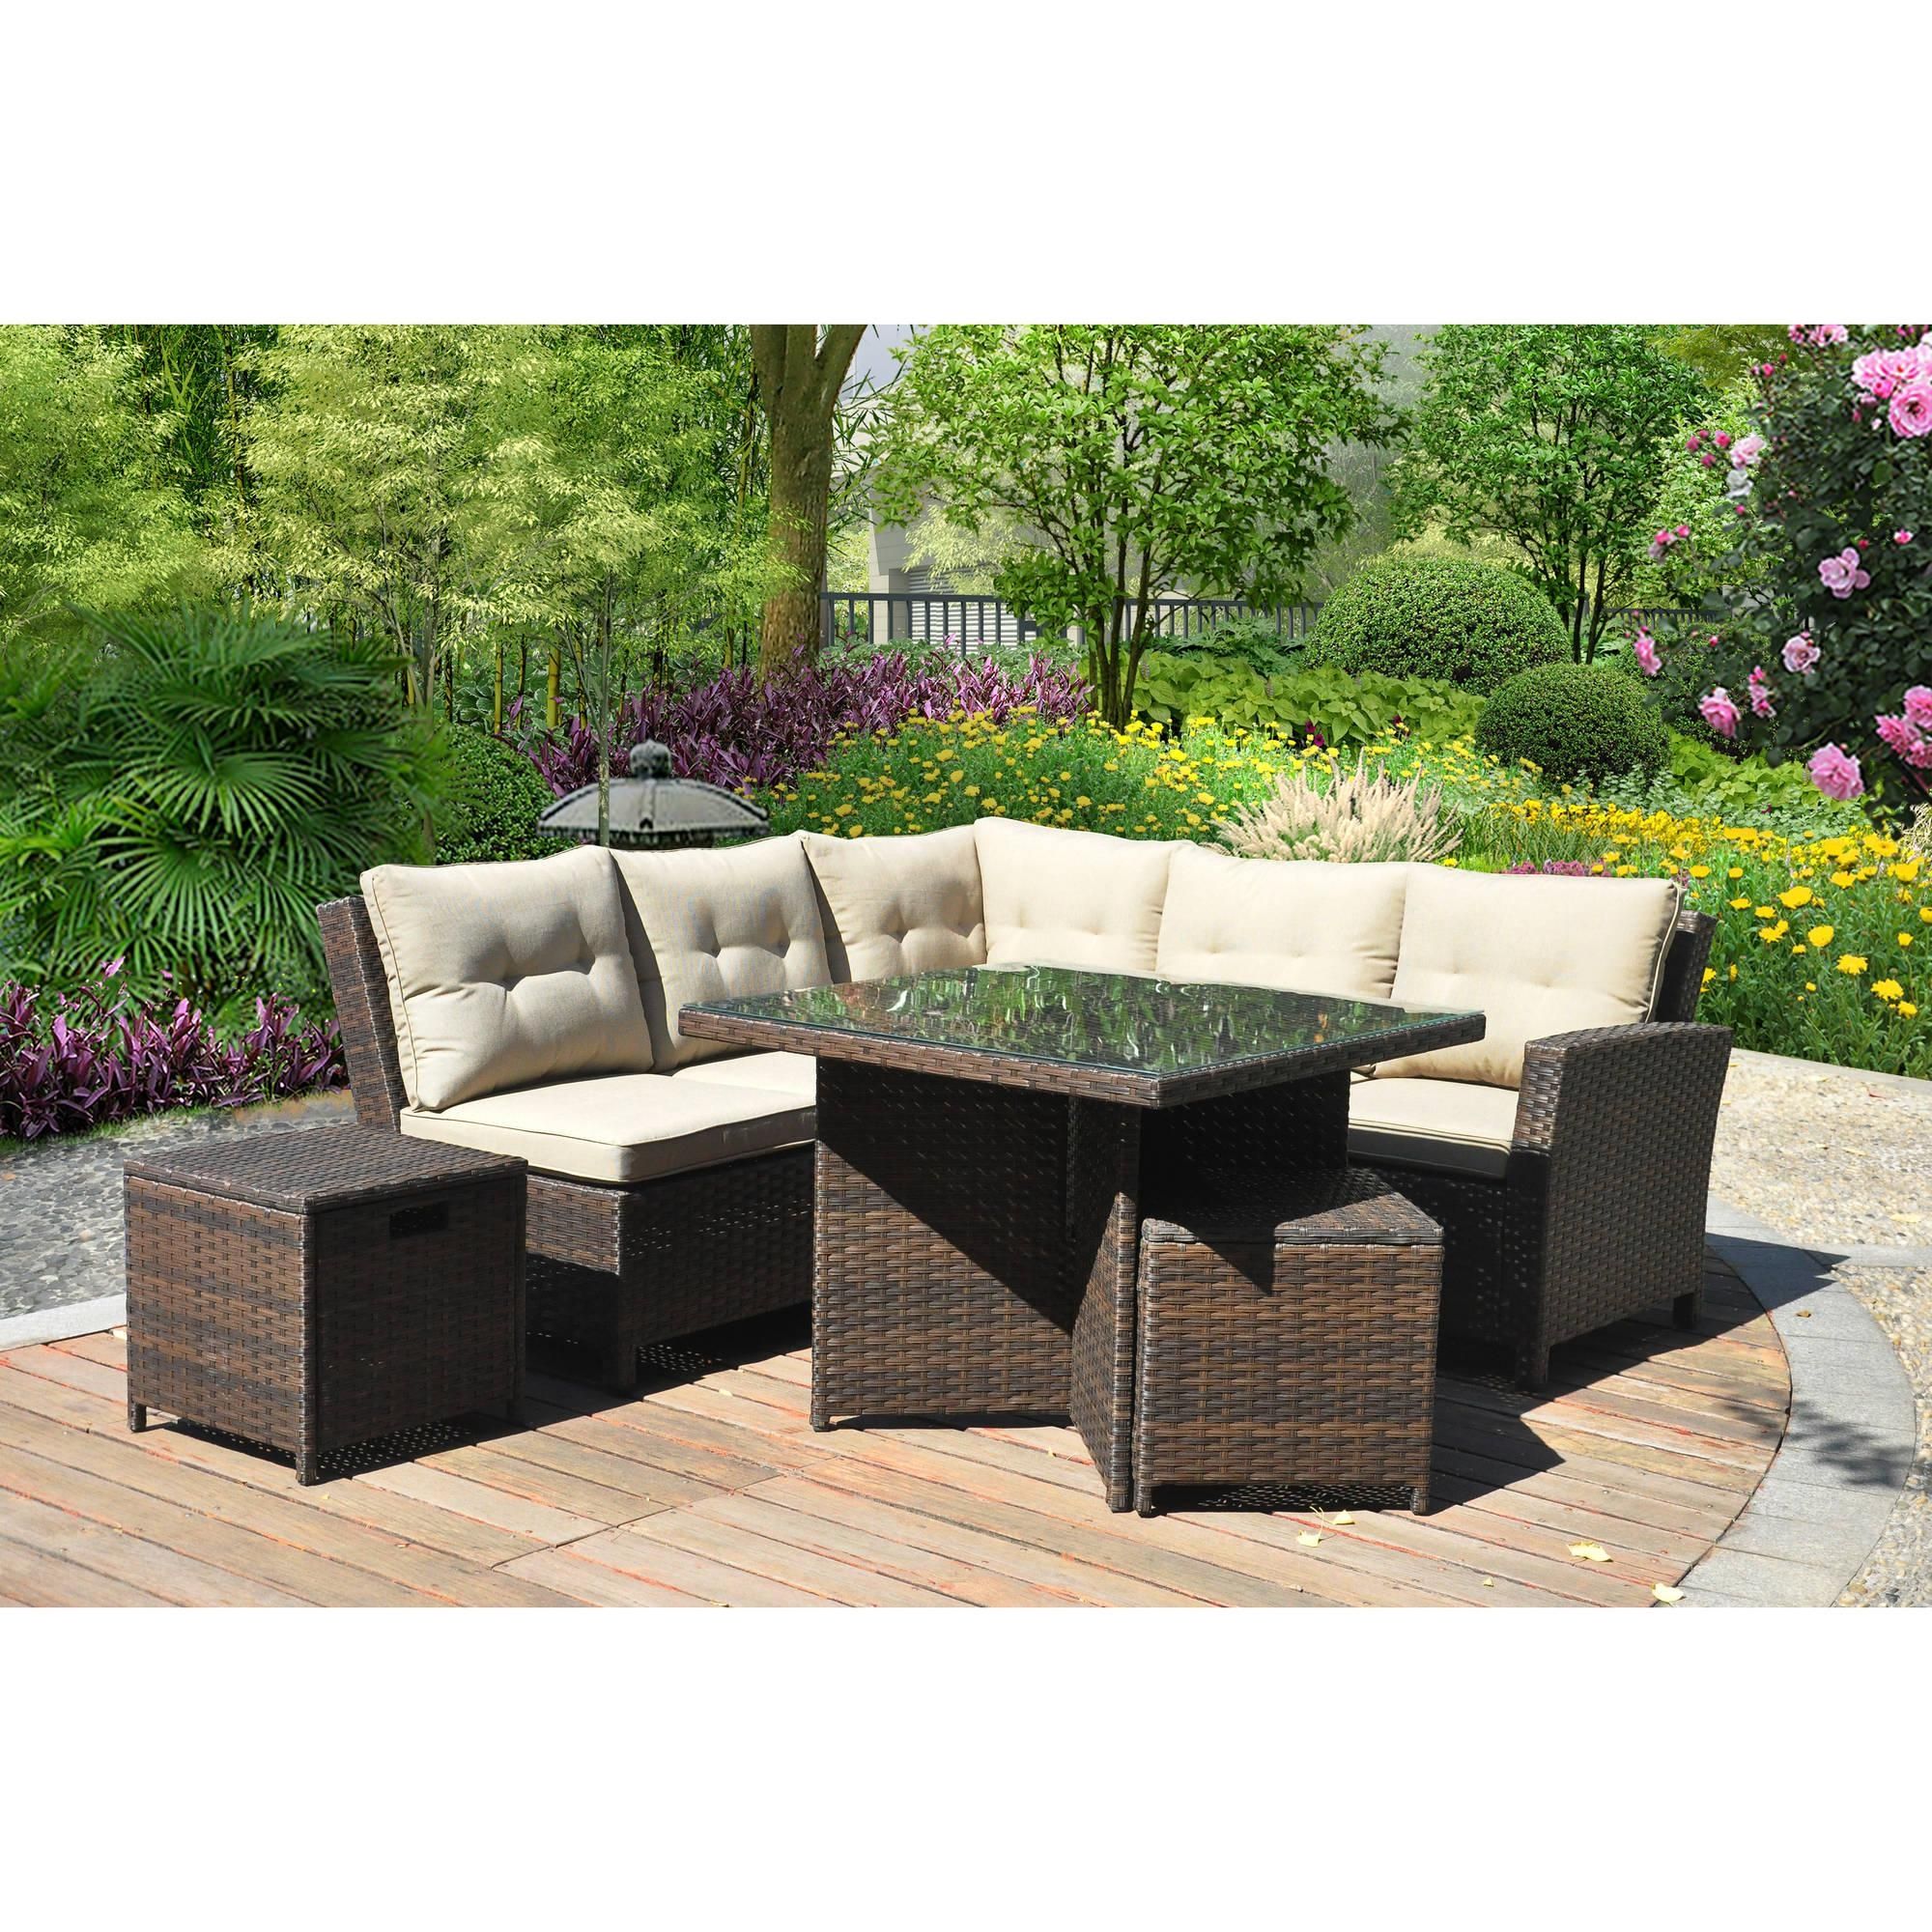 Mainstays Ragan Meadow Ii 7 Piece Outdoor Sectional Sofa, Seats 5 Inside Outdoor Sofa Chairs (View 9 of 20)